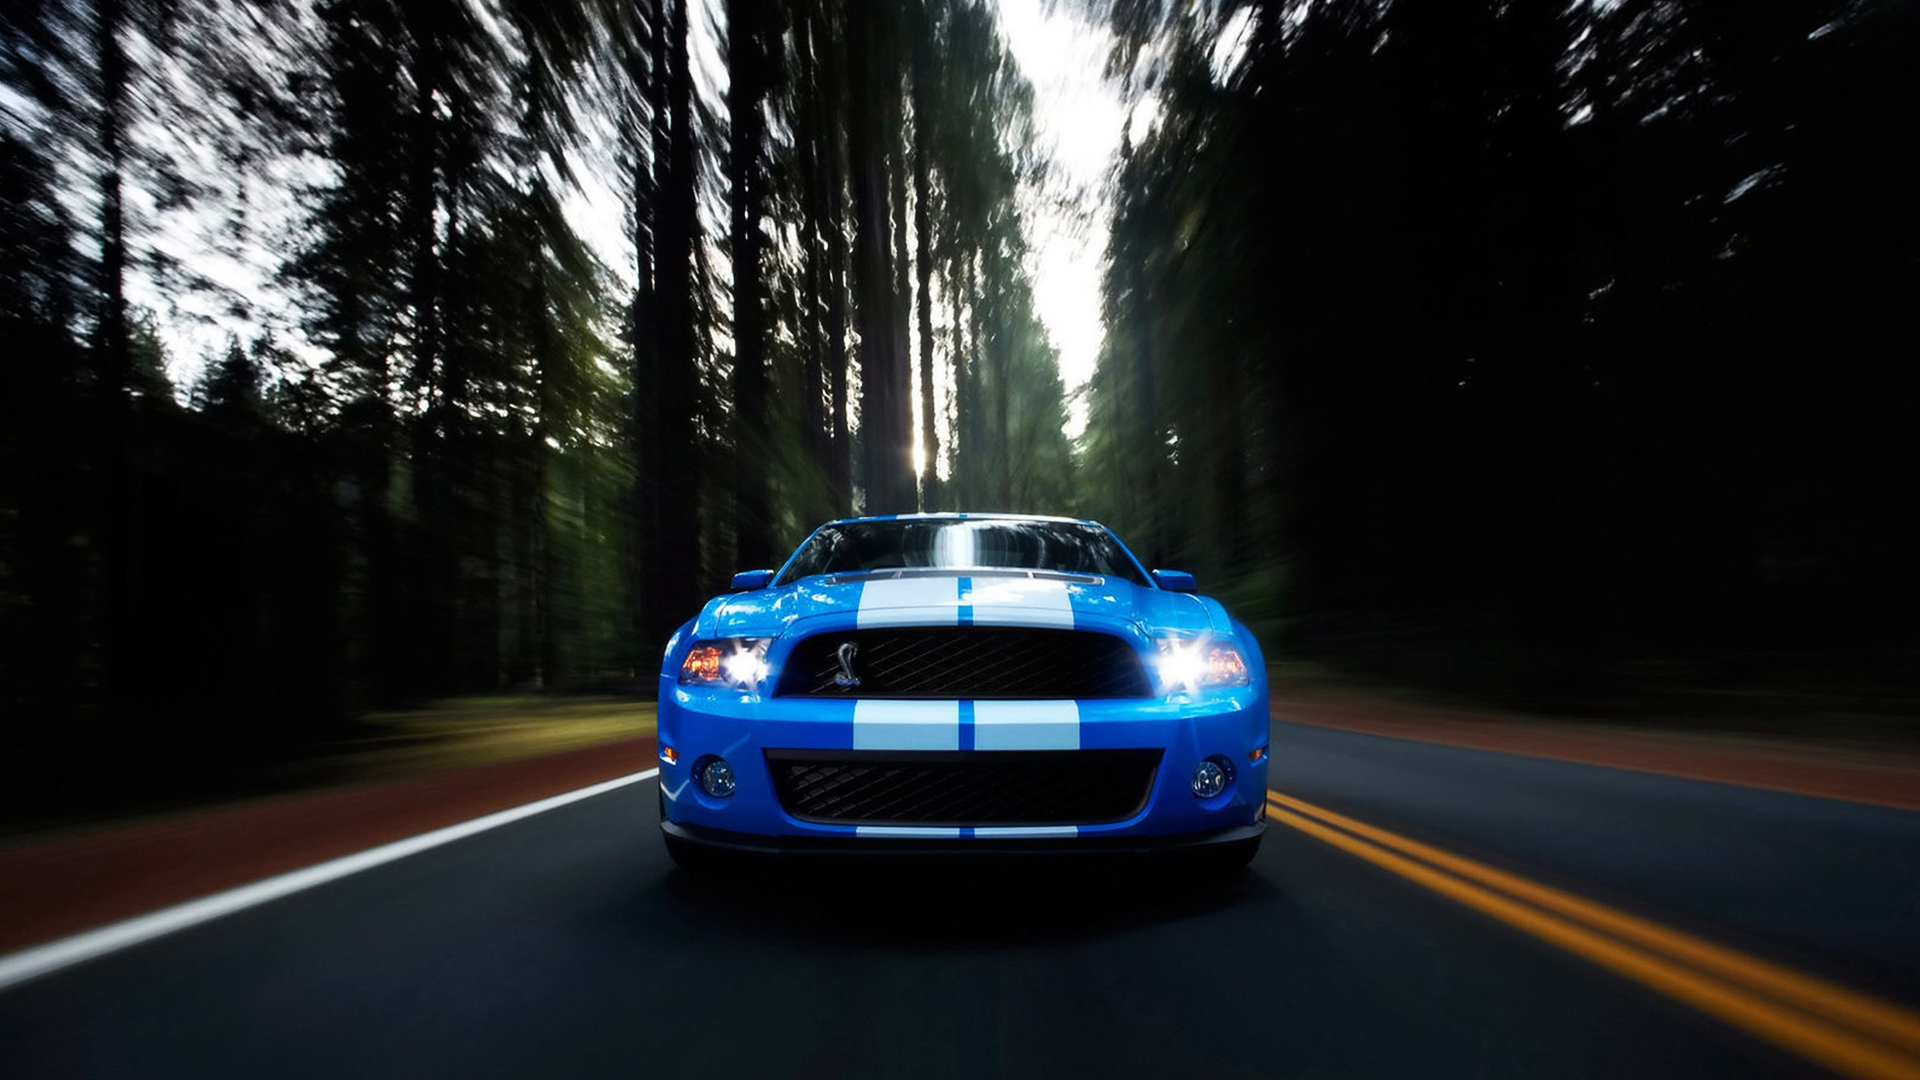 Hd Wallpapers For Pcwallpapers Hd Nature For Mobile - Mustang Gt Ipad Hintergrund - HD Wallpaper 